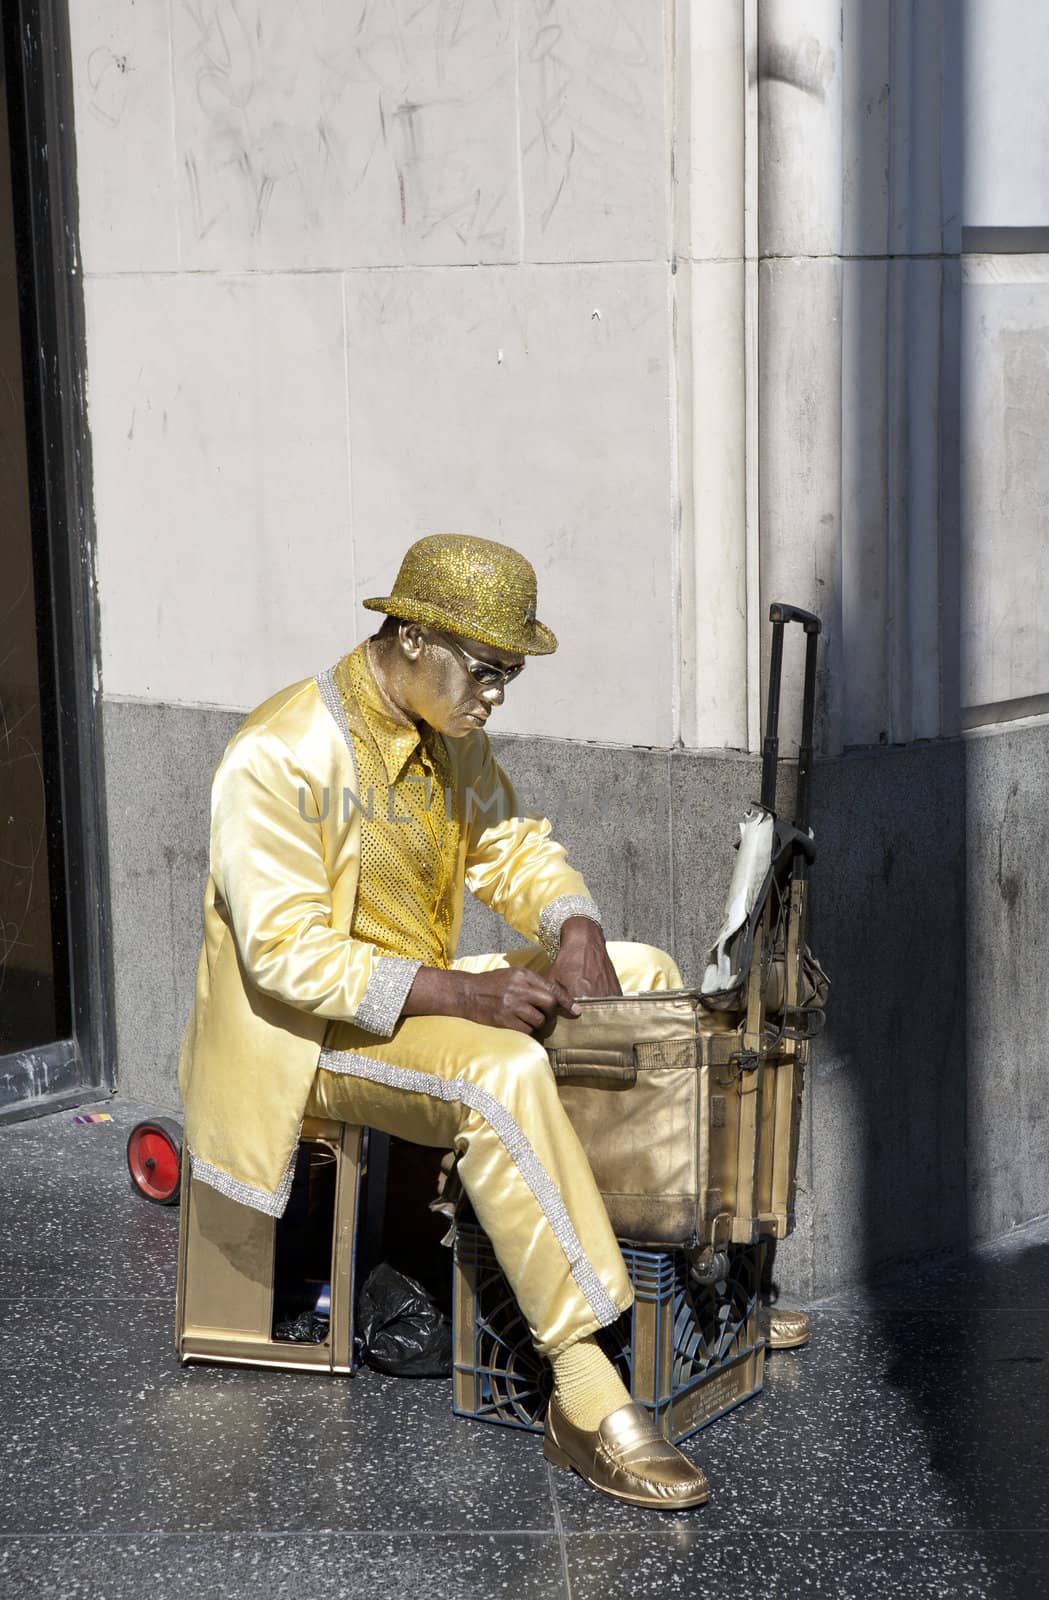 Street performer covered in gold paint getting ready to perform on a sidewalk on Hollywood Blvd.